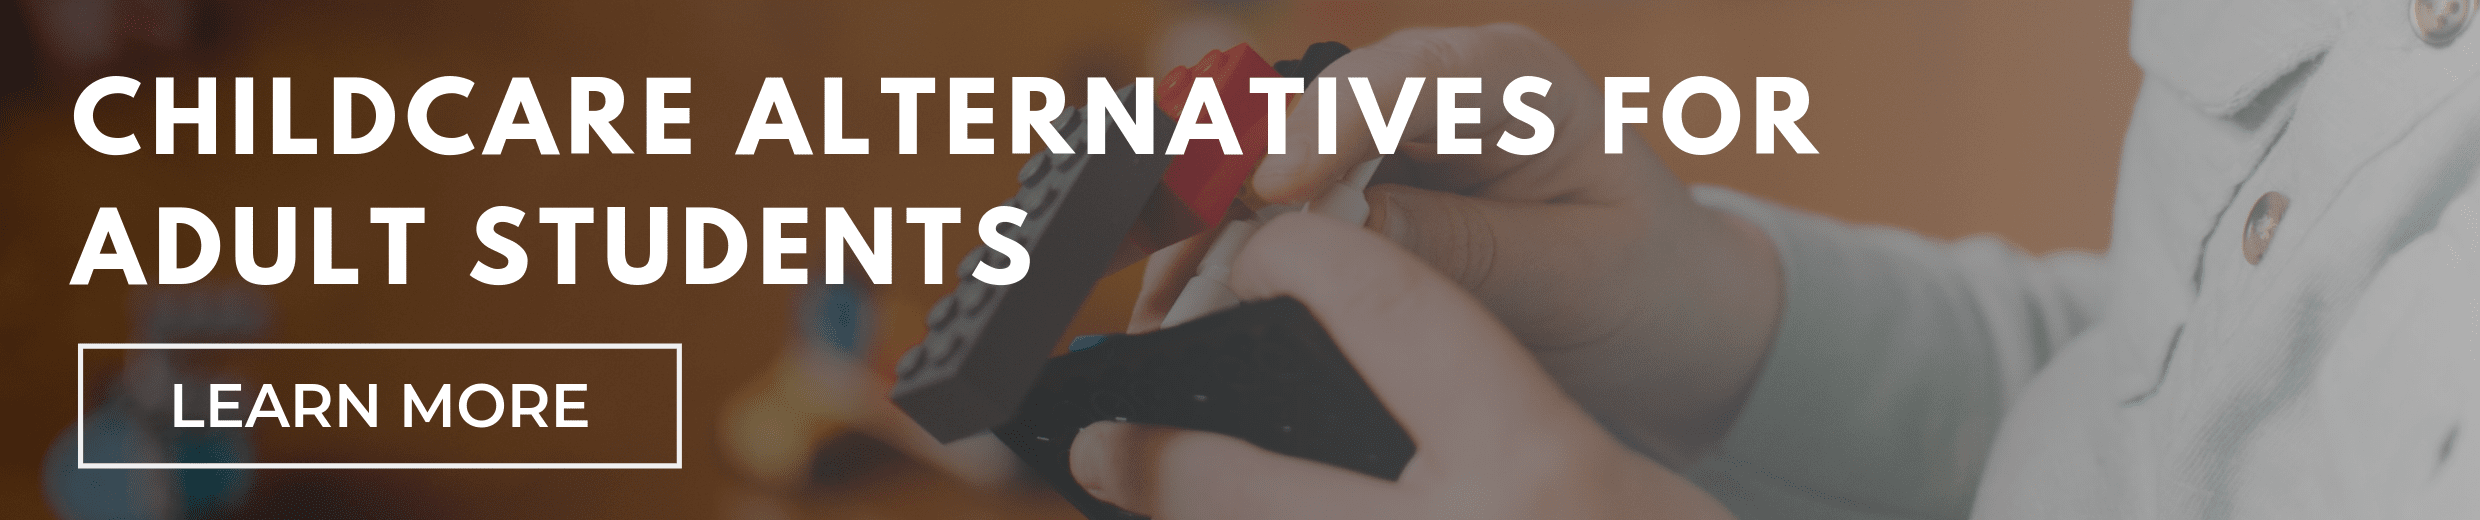 Childcare Alternatives for Adult Students